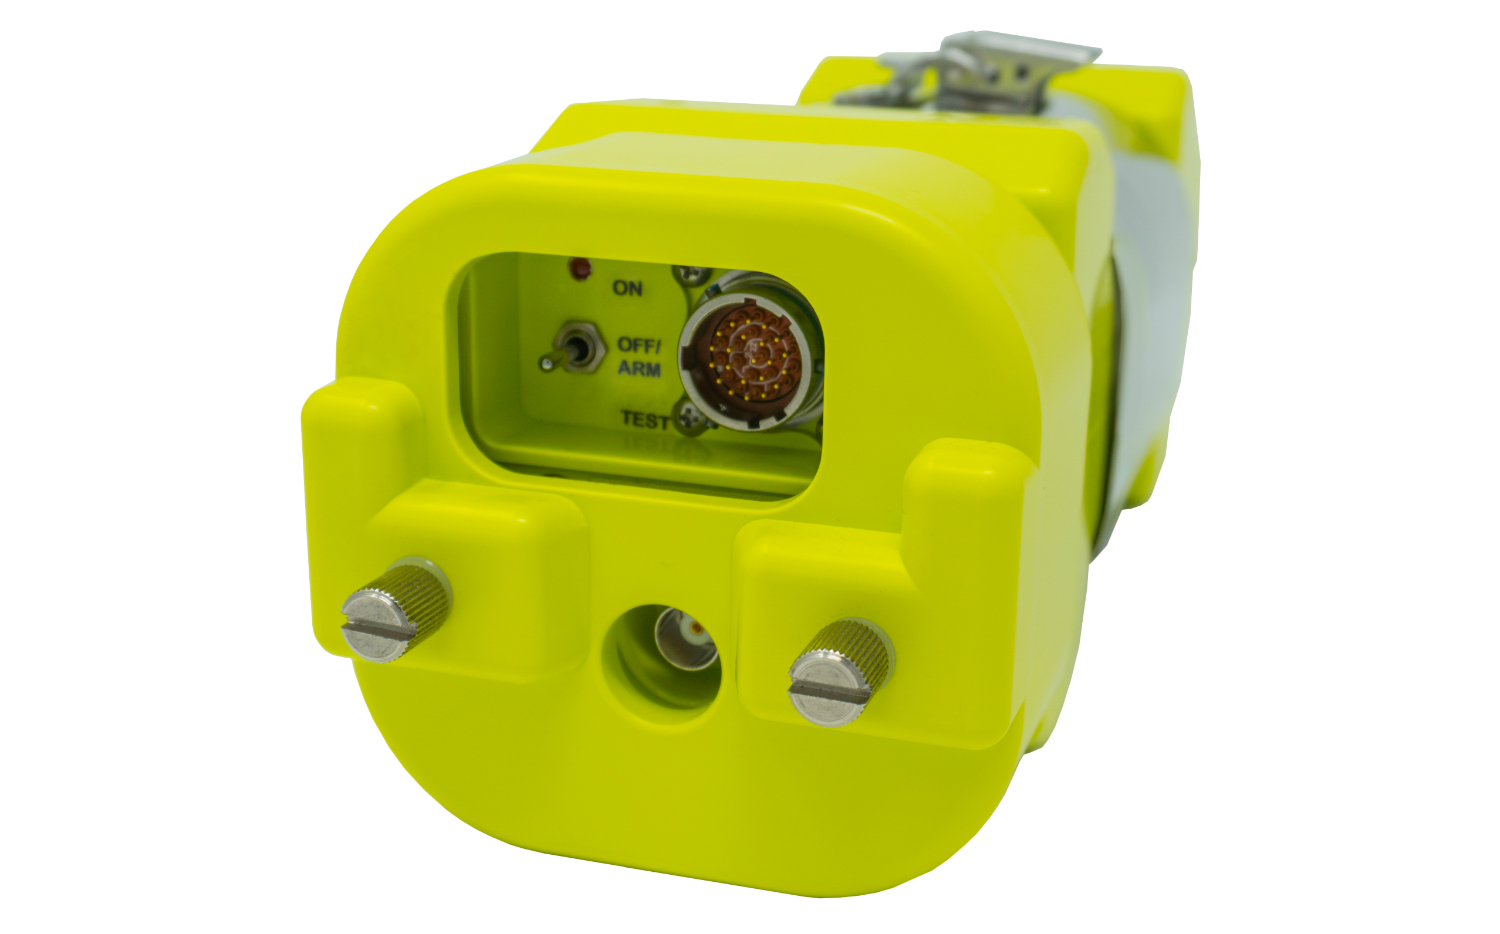 ARTEX says its new ARTEX ELT 4000 HM Emergency Locator Transmitter is the world’s only 406 MHz approved alkaline battery-powered emergency locator transmitter (ELT). ARTEX Photo